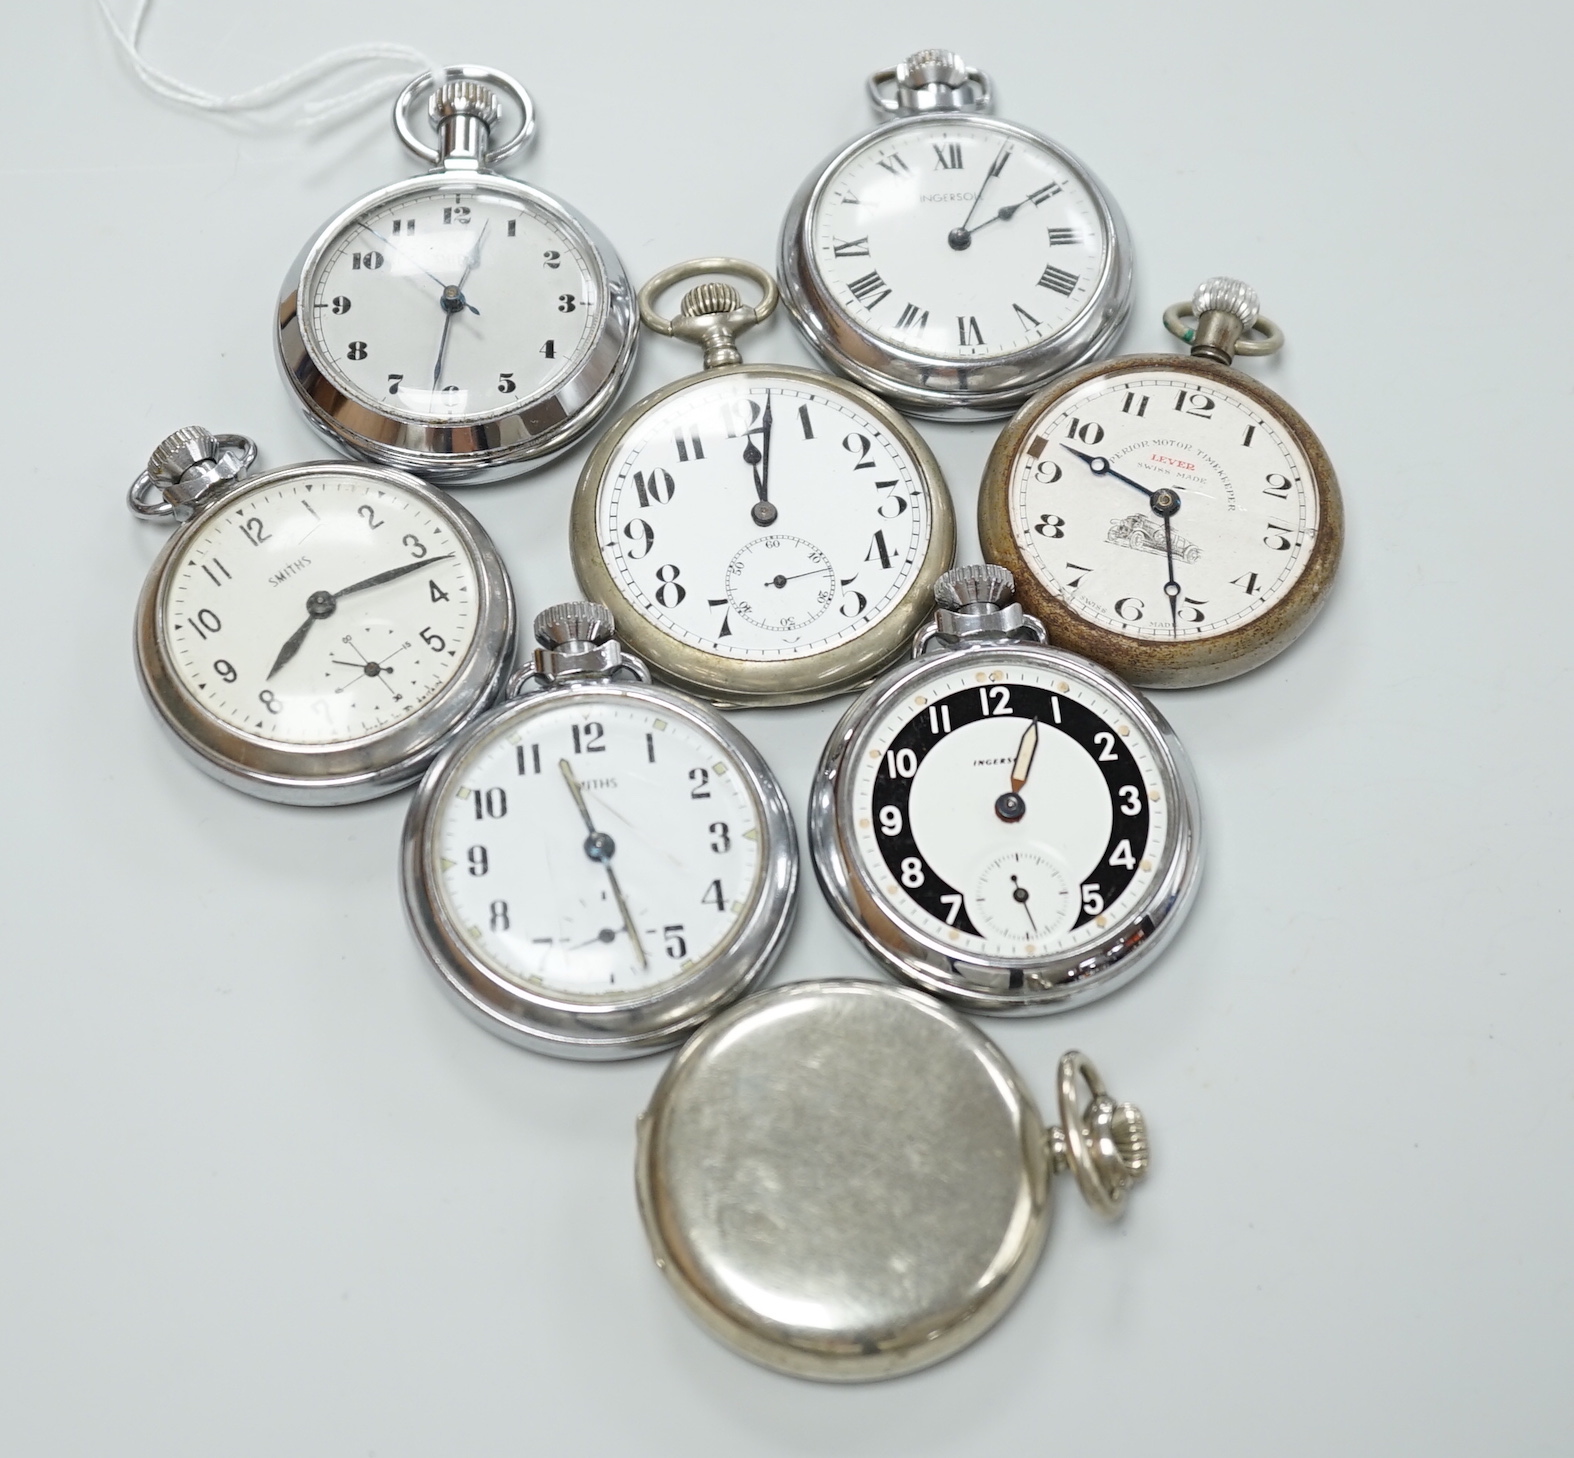 Eight assorted chrome or nickel cased pocket watches, including three Smiths, two Ingersoll, one Record and two others.